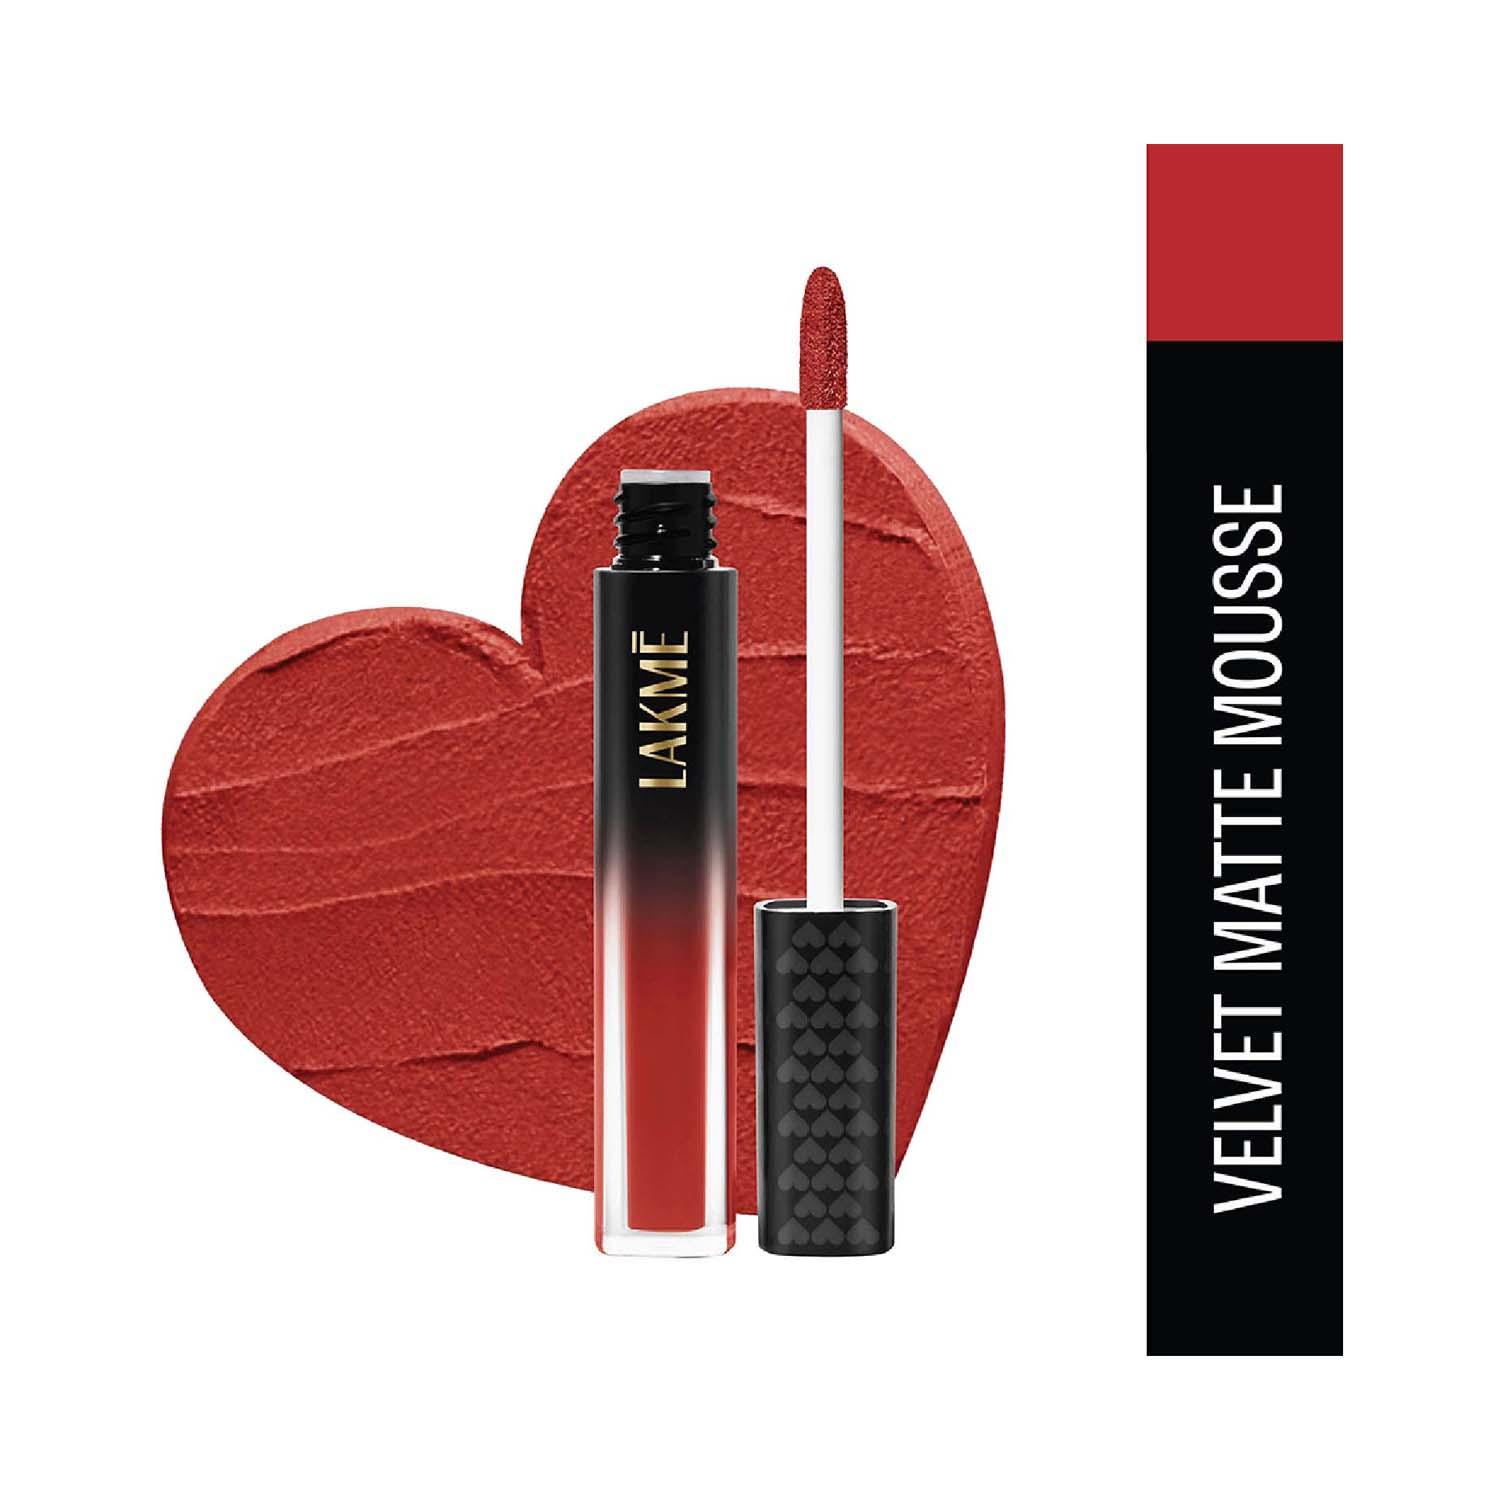 Lakme | Lakme Extraordin-Airy Lip Mousse Liquid Lipstick - The One Red (4.6g)